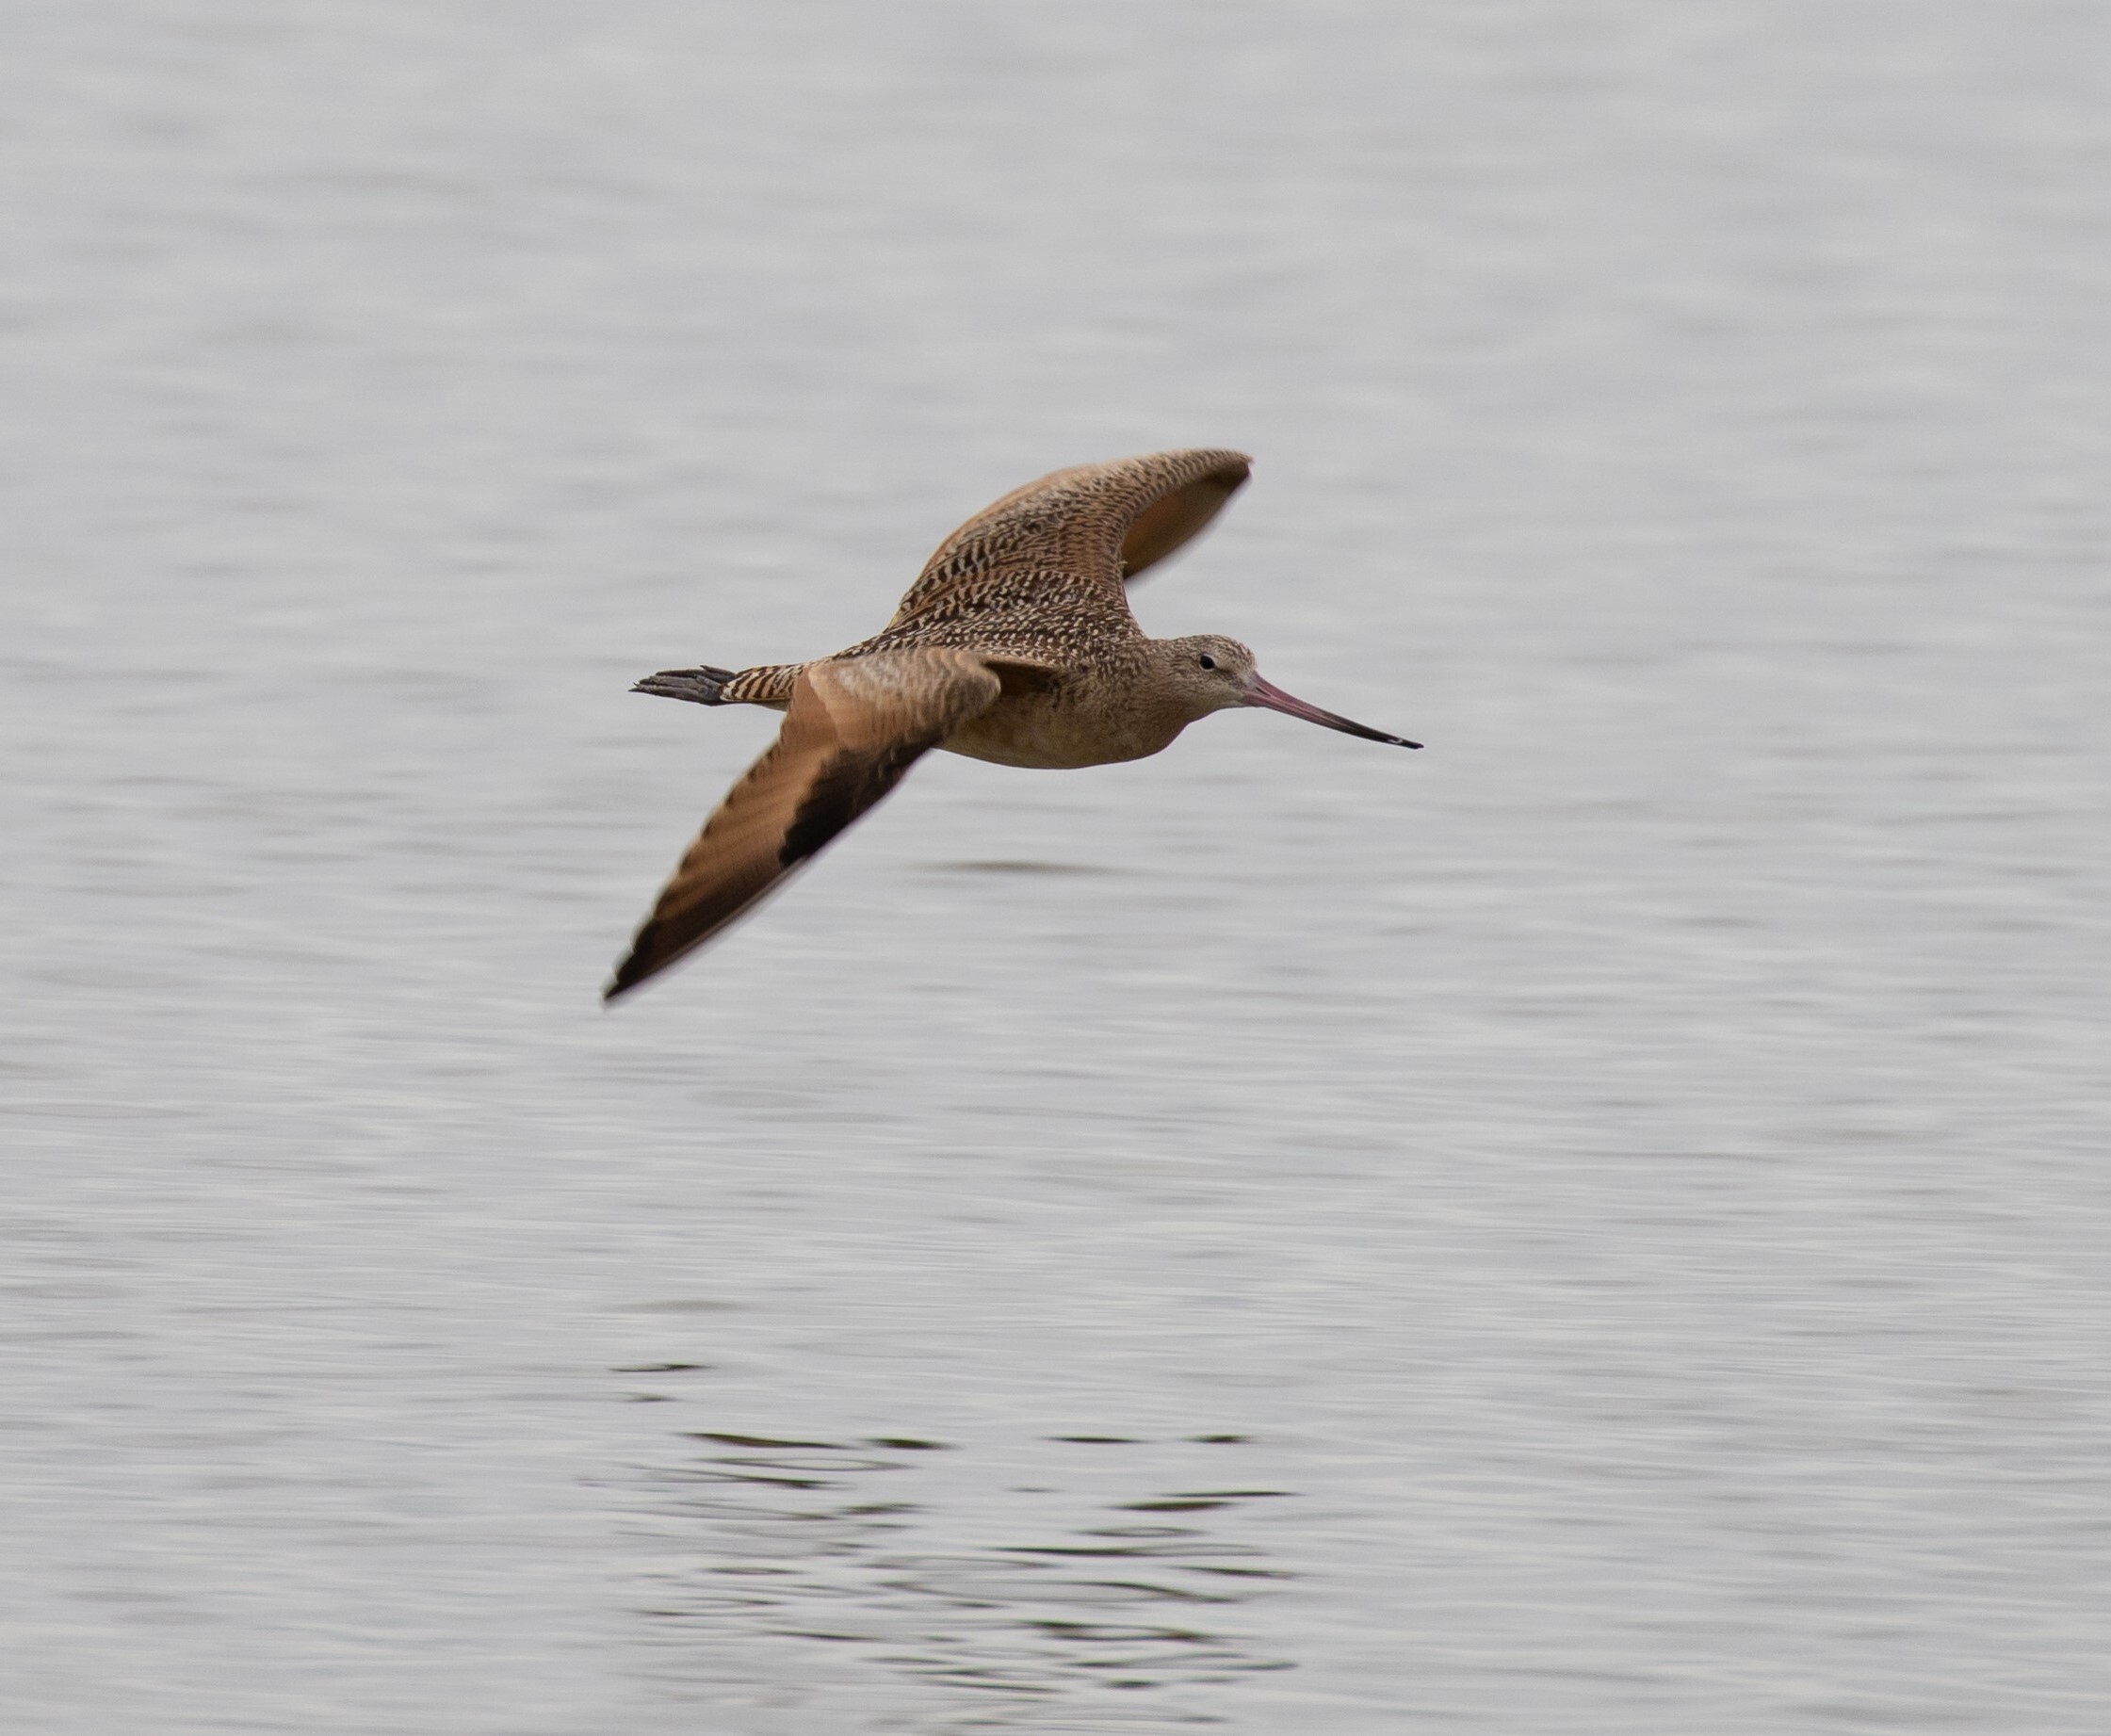 Marbled Godwits sometimes stop by Jamaica Bay. Photo: <a href="https://www.flickr.com/photos/144871758@N05/" target="_blank">Ryan F. Mandelbaum</a>